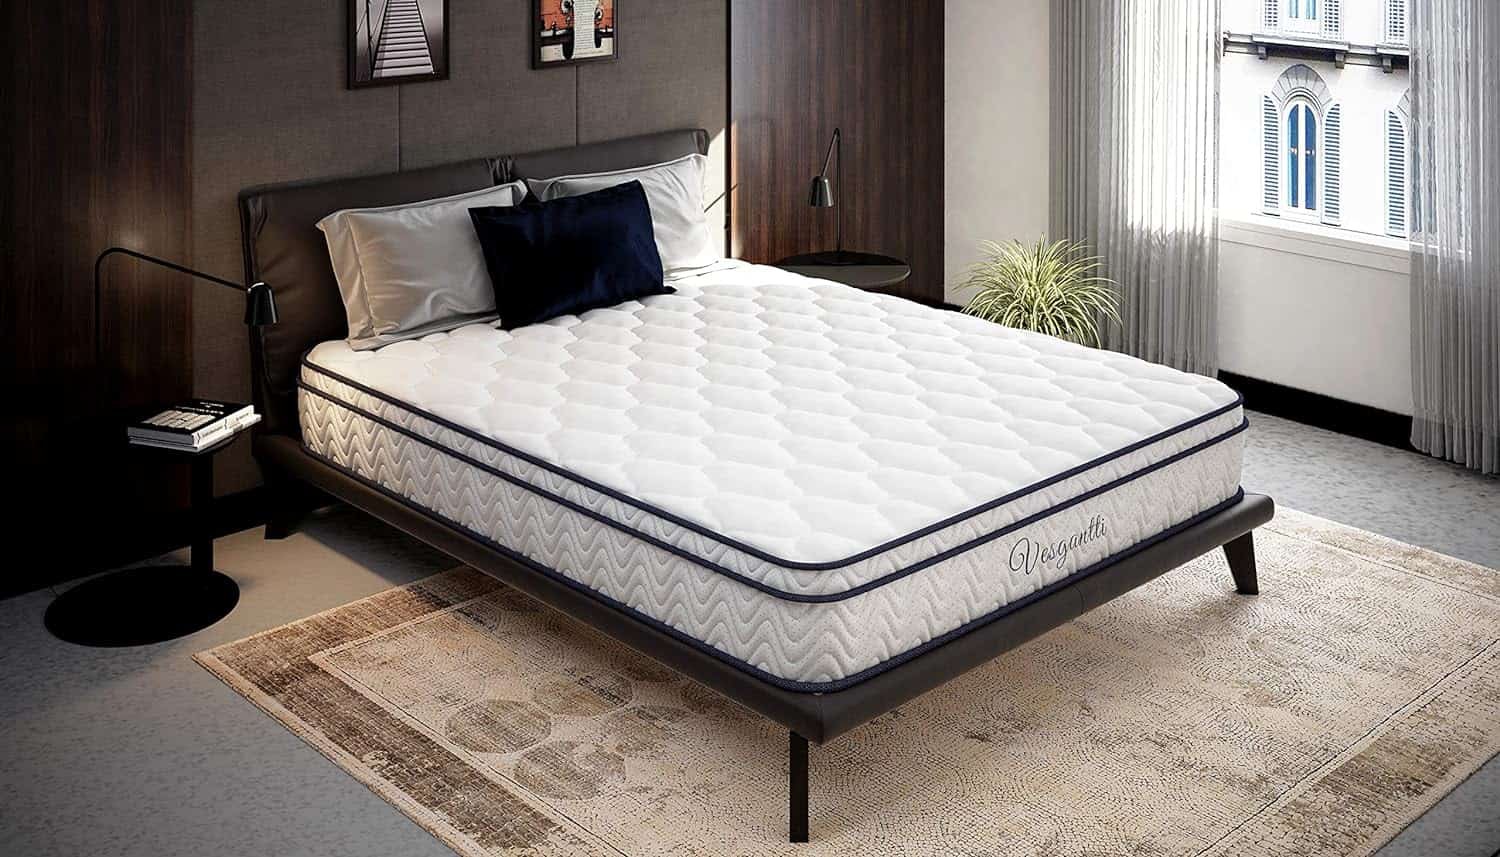 Vesgantti Double Mattress Review: Top Choice for Sleep Comfort?